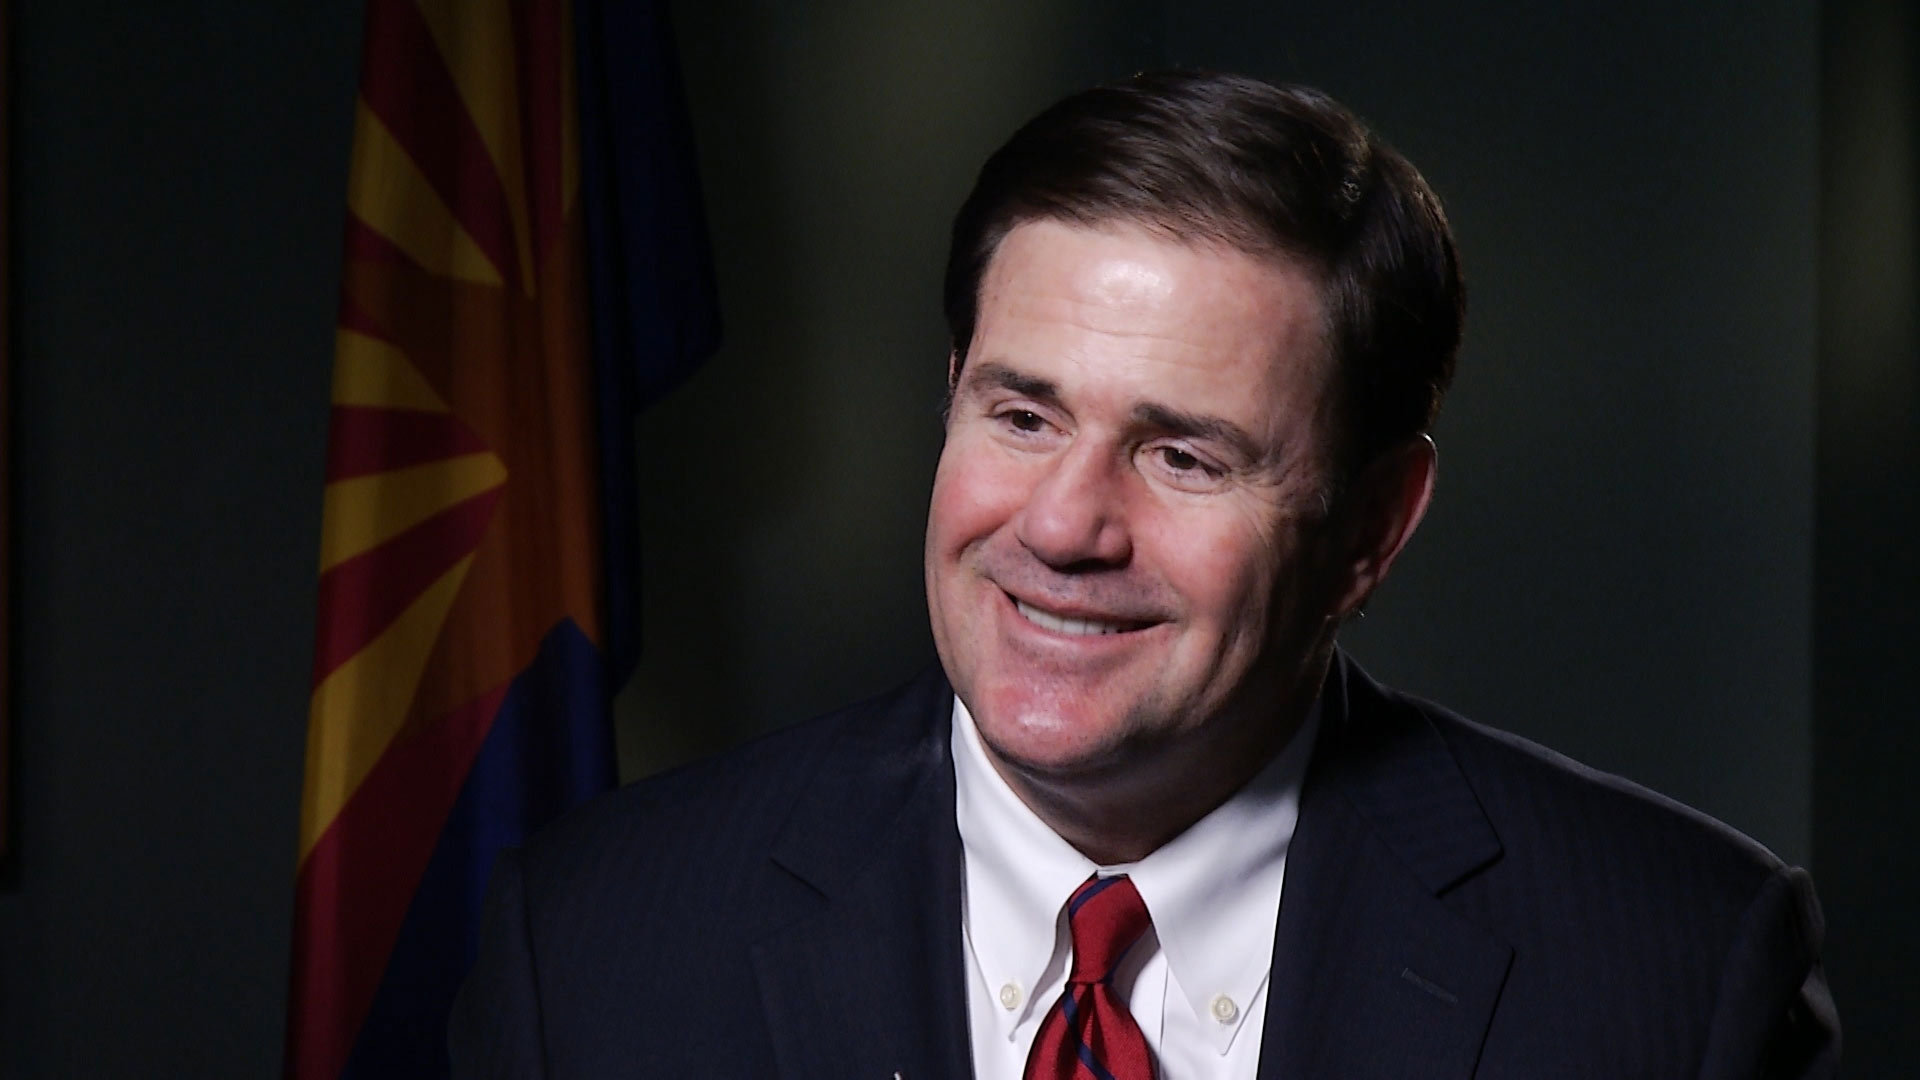 Governor Doug Ducey, during an interview with AZPM's Lorraine Rivera from January 2016.